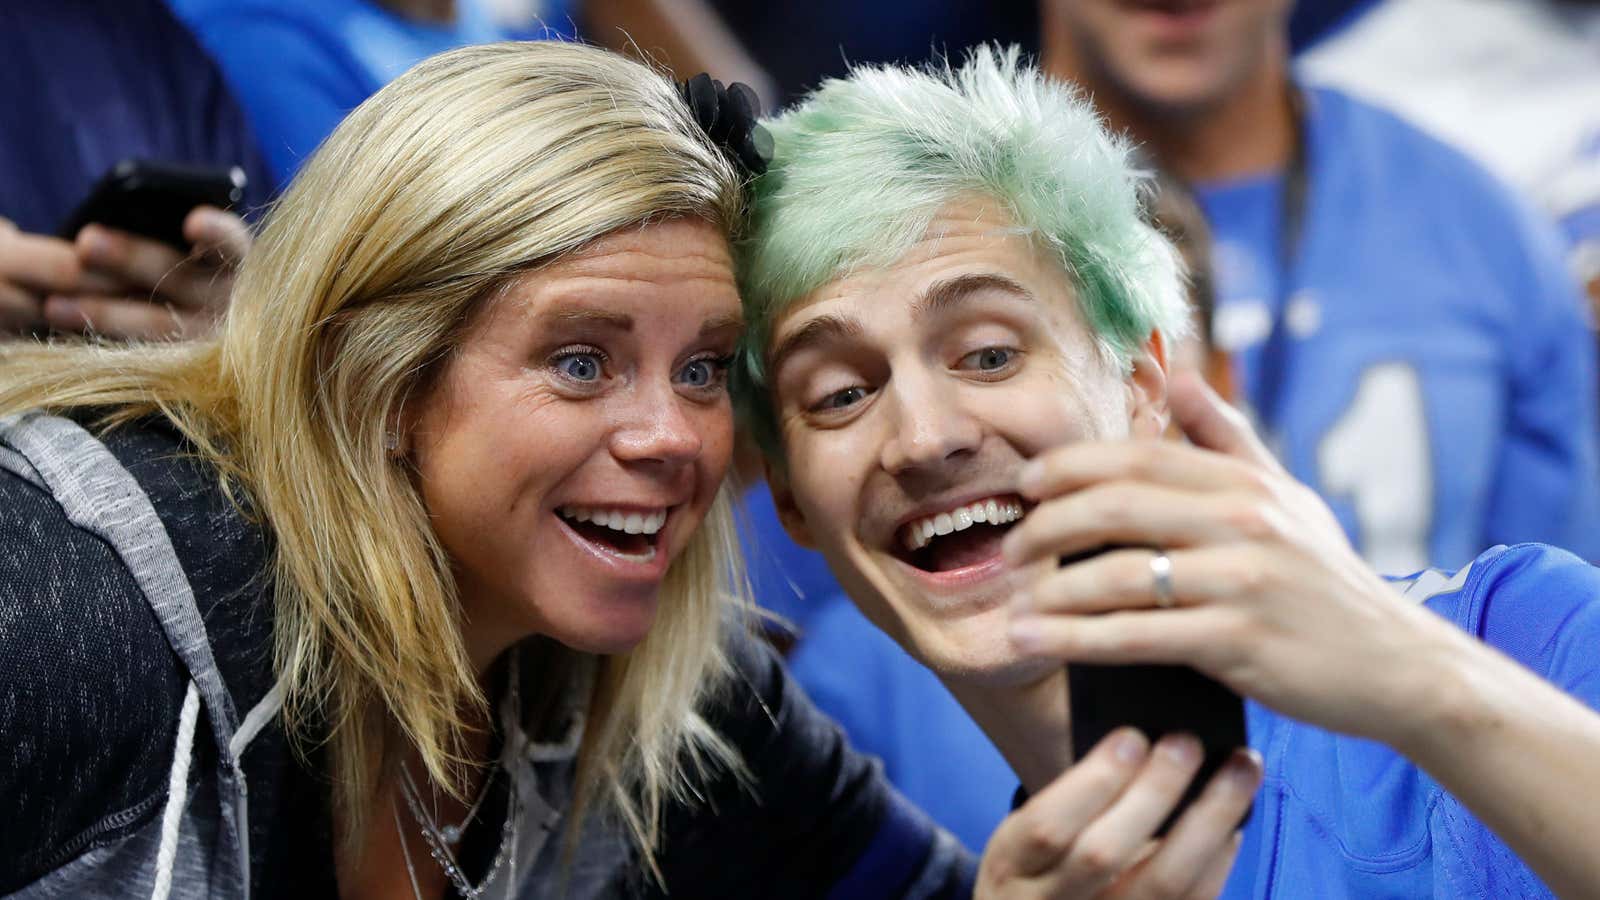 Tyler “Ninja” Blevins takes photographs with fans before an NFL football game.